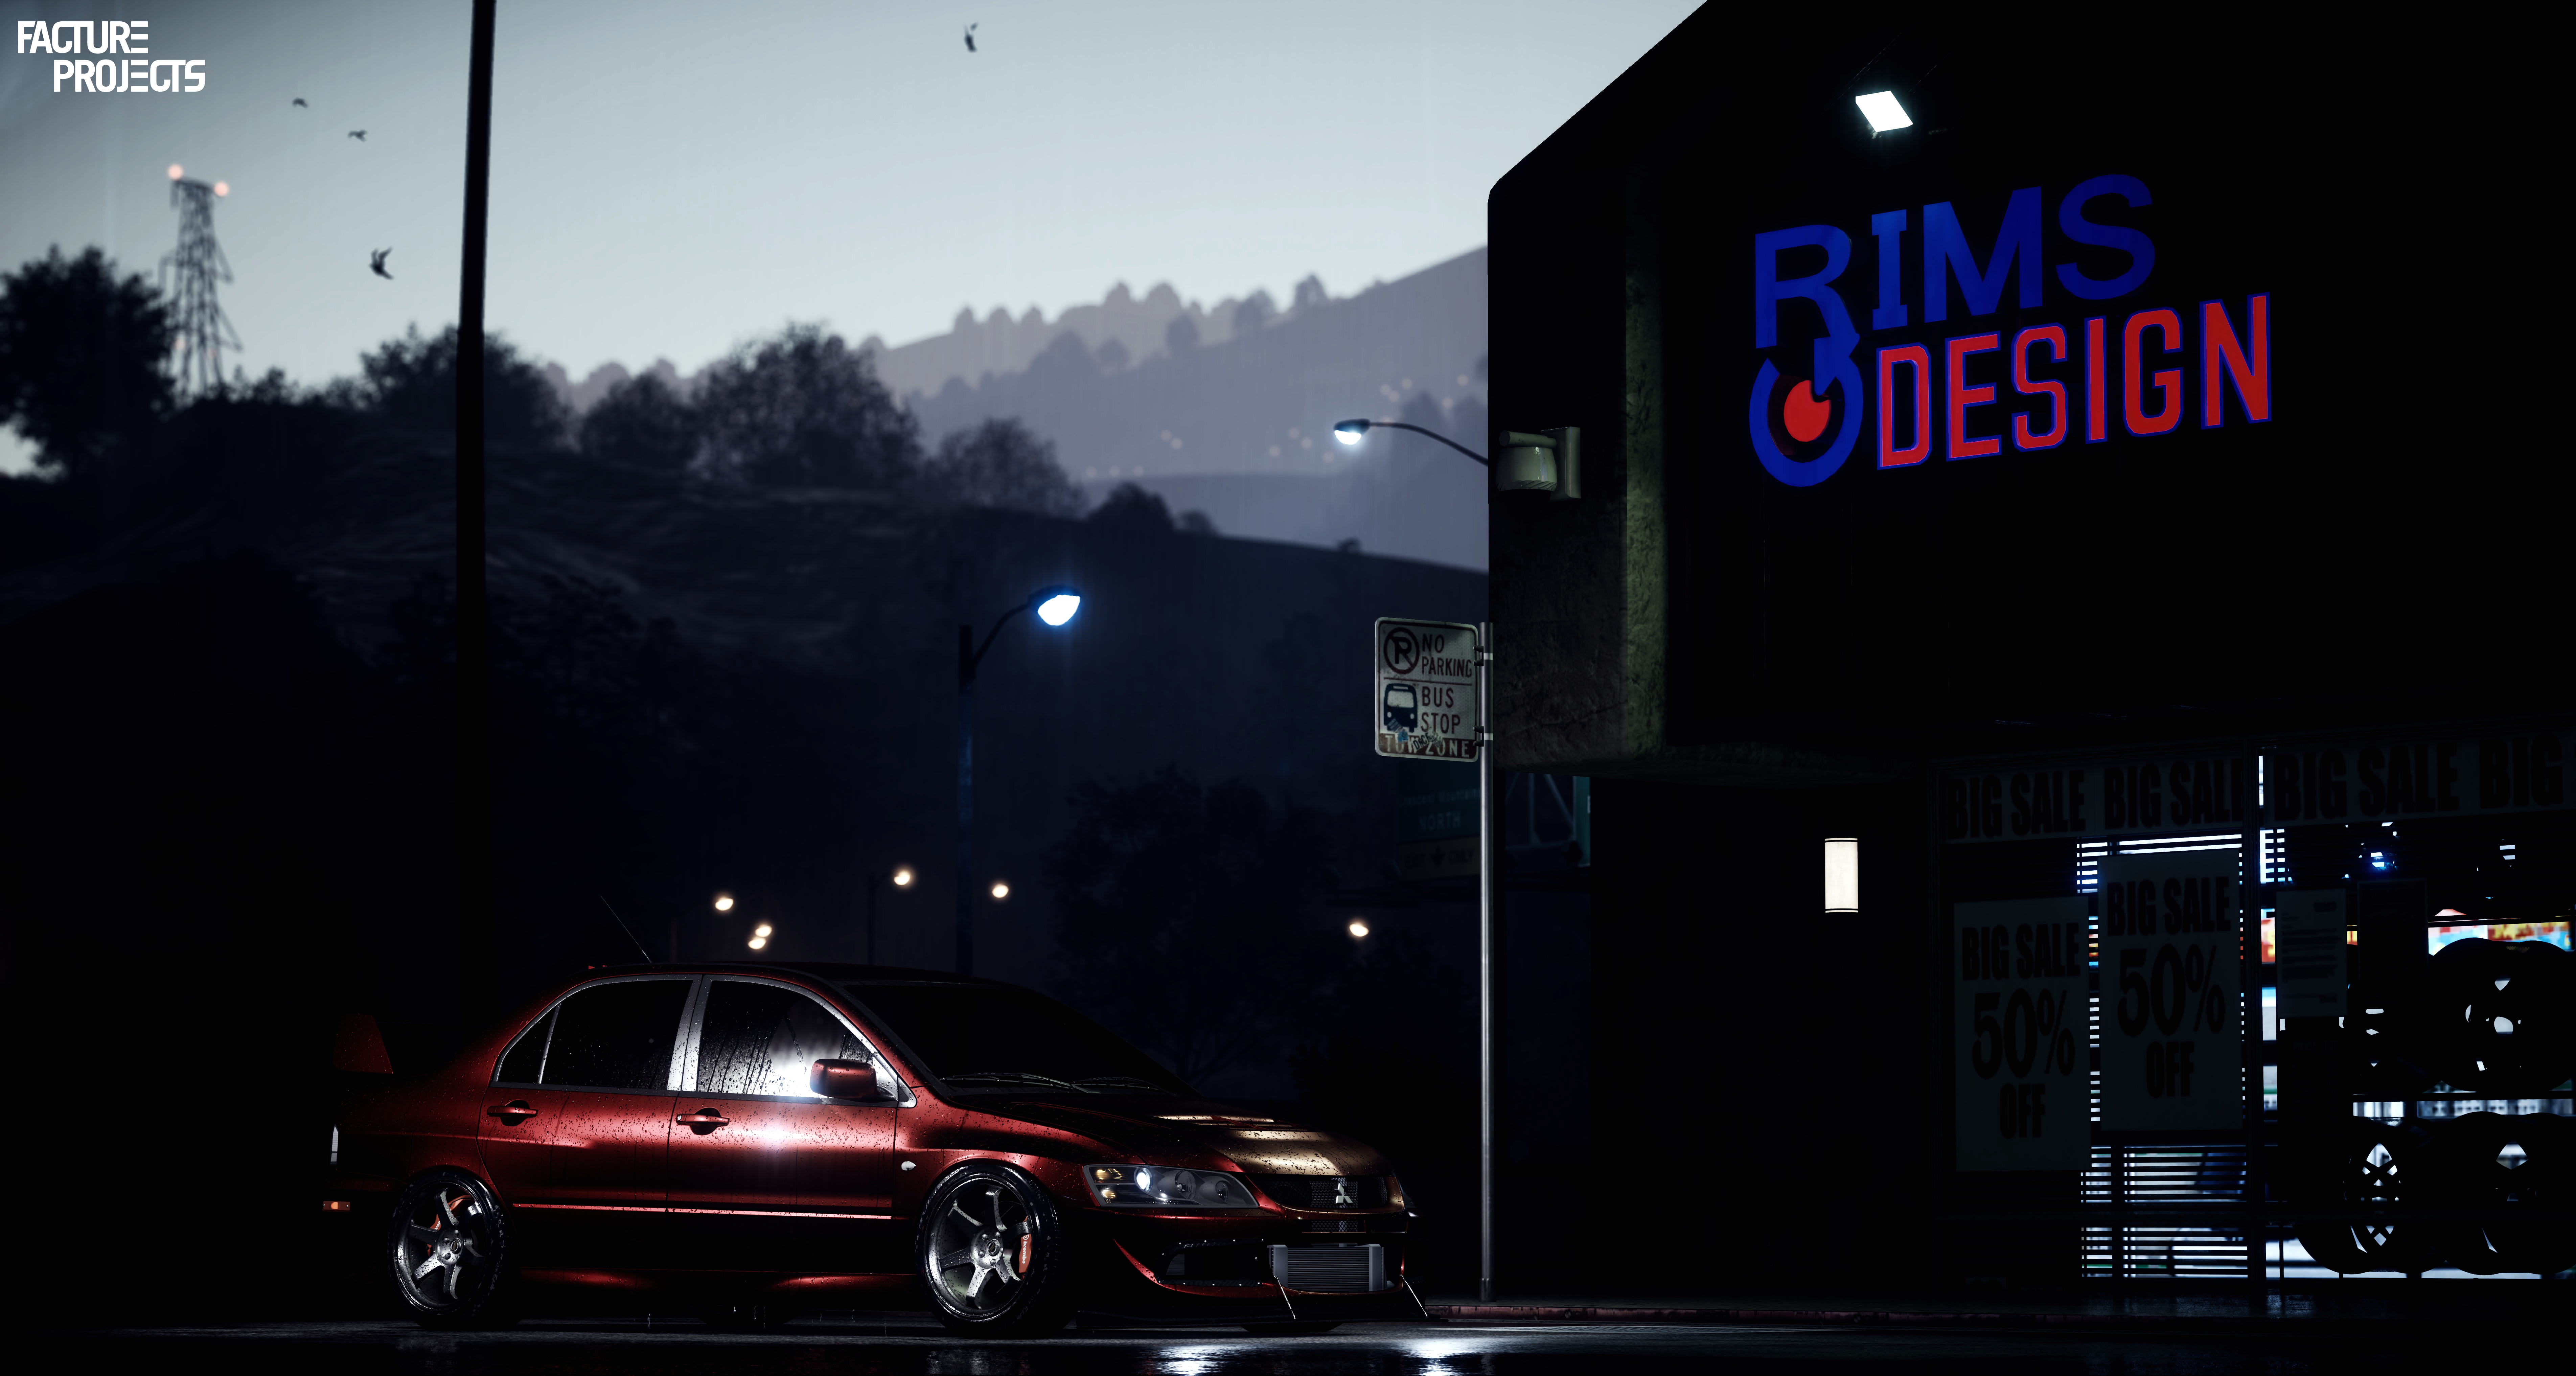 Evo Mitsubishi Red NFS 2015 Need For Speed Car 7616x4068